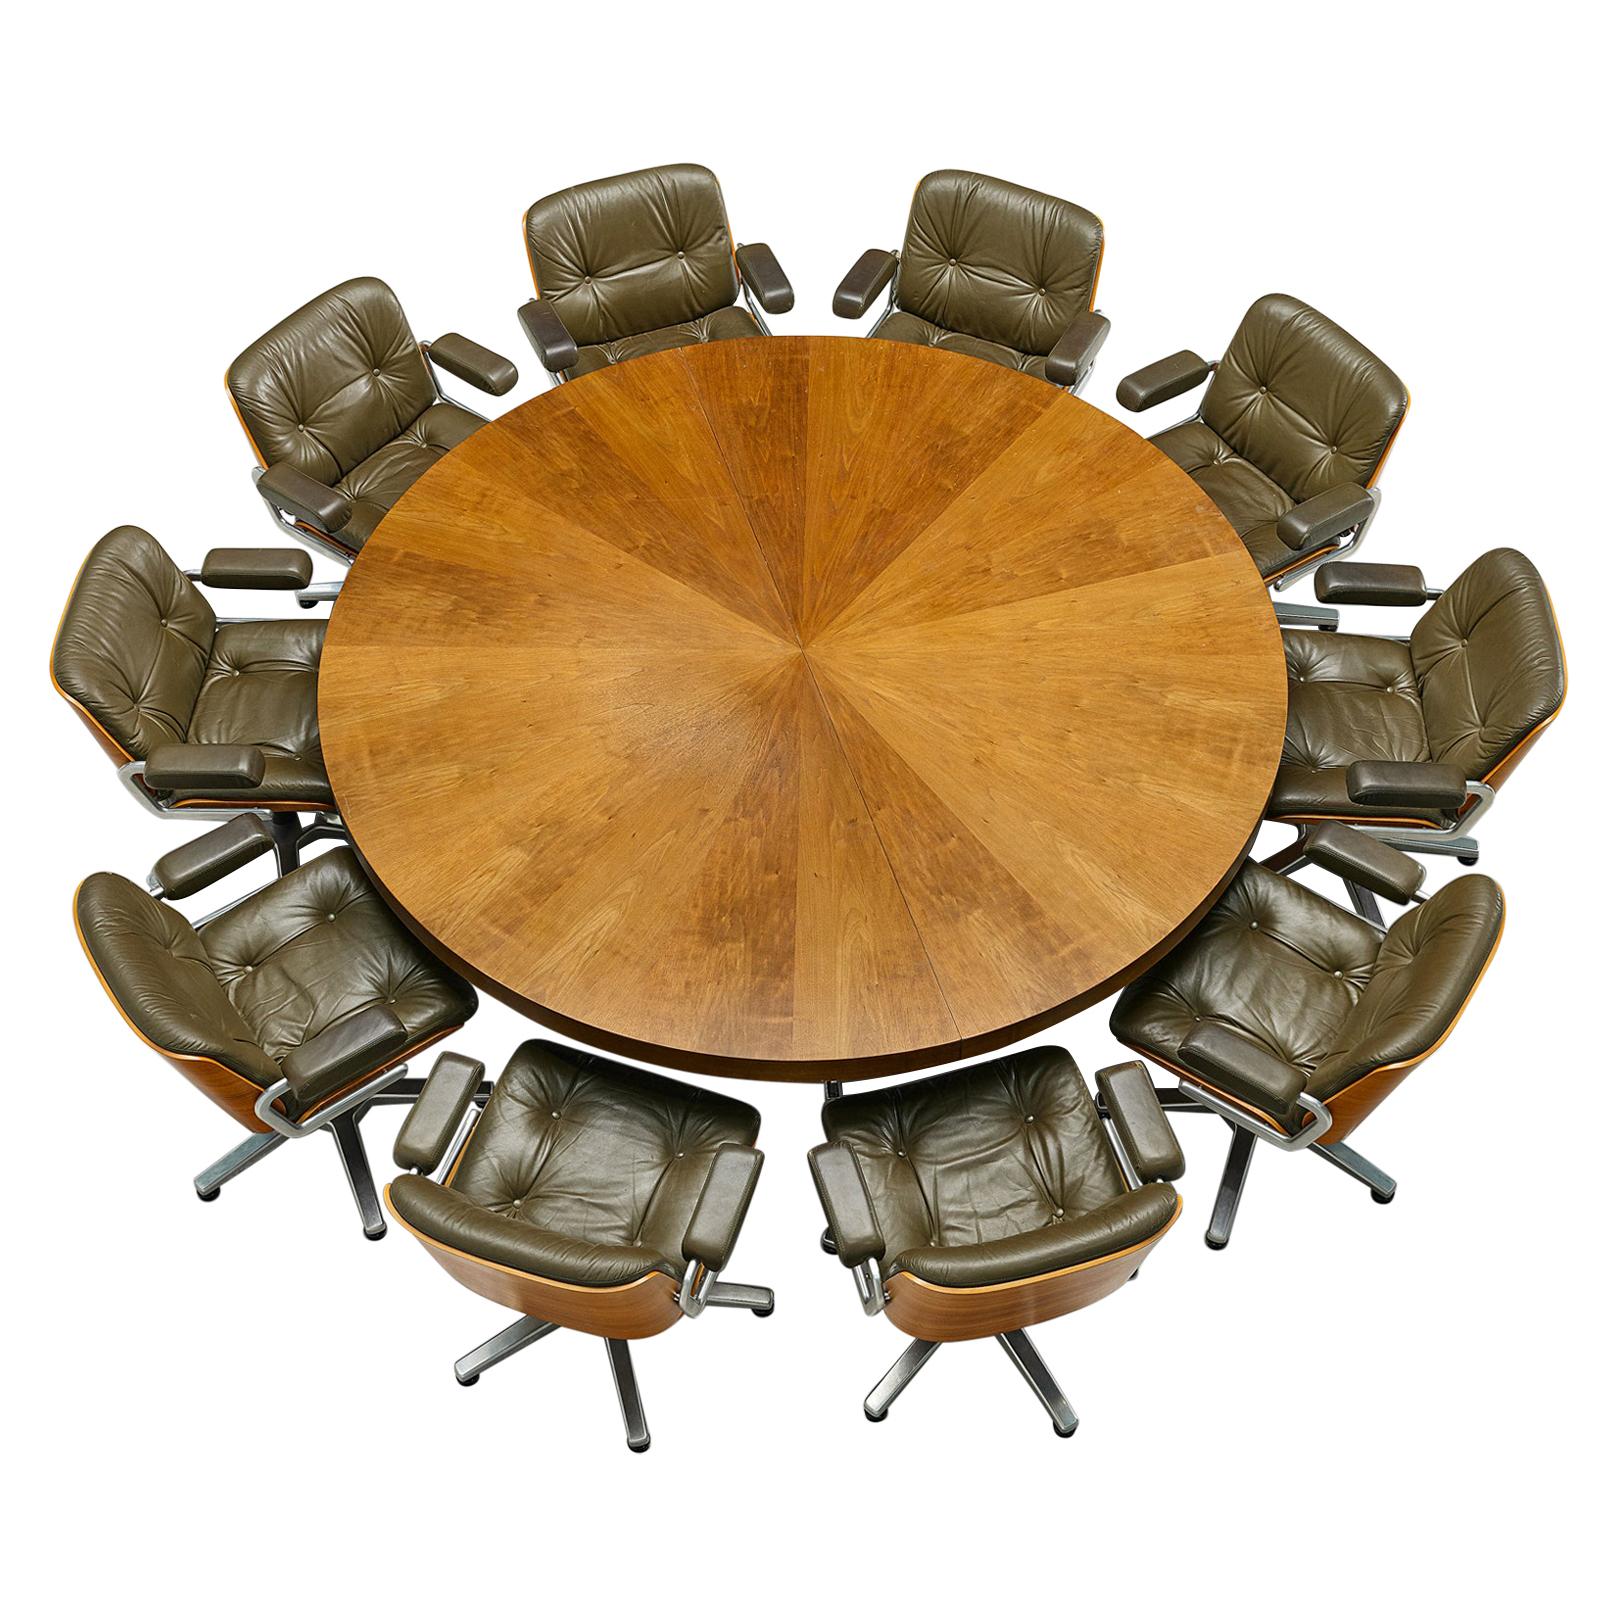 Set of Large Round Conference Table and Swivel Chairs